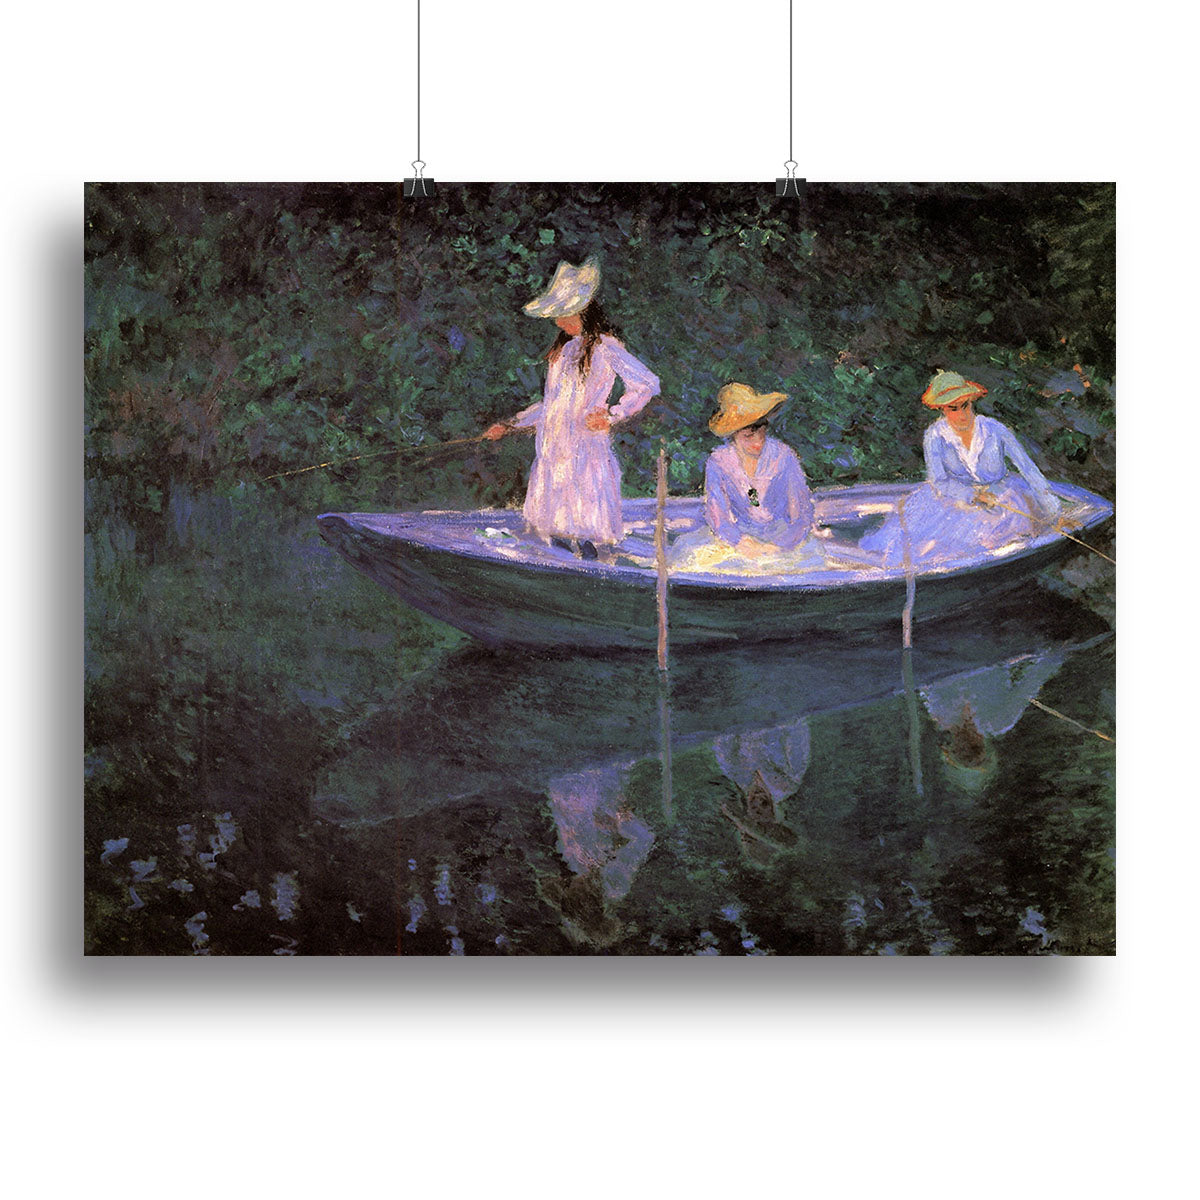 La Barque at Giverny by Monet Canvas Print or Poster - Canvas Art Rocks - 2